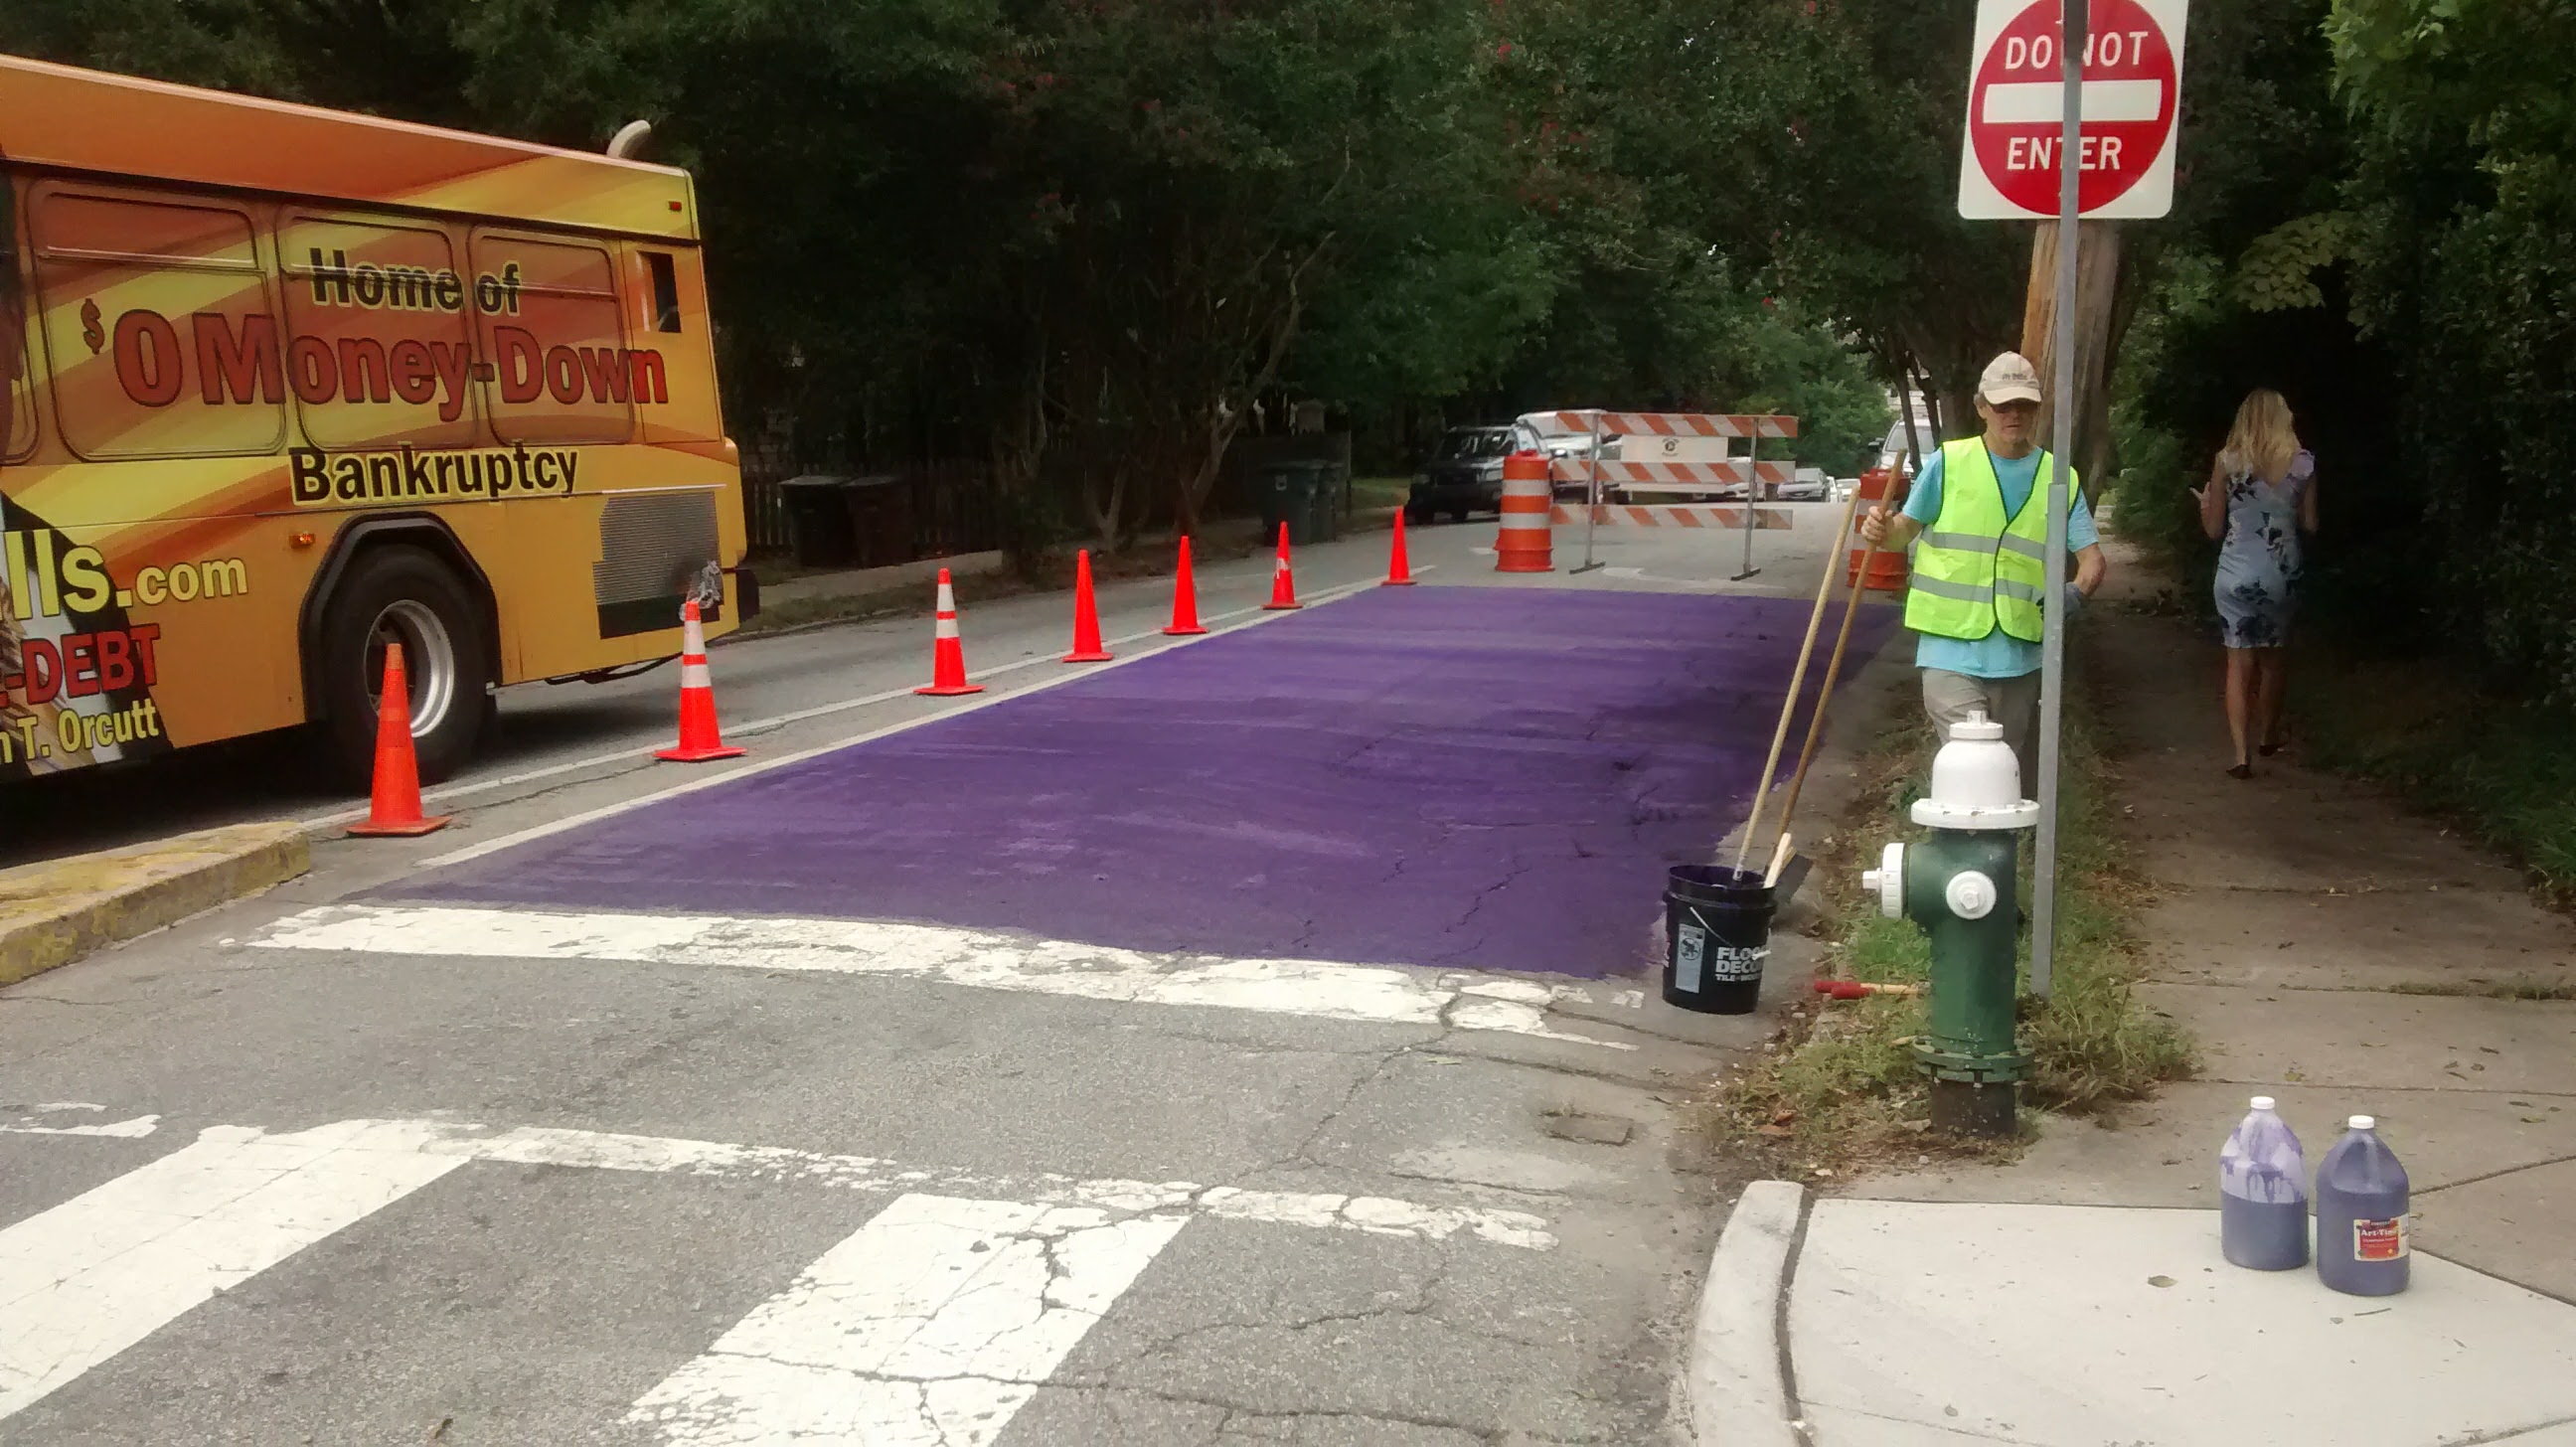 Part of the street blocked off and painted purple